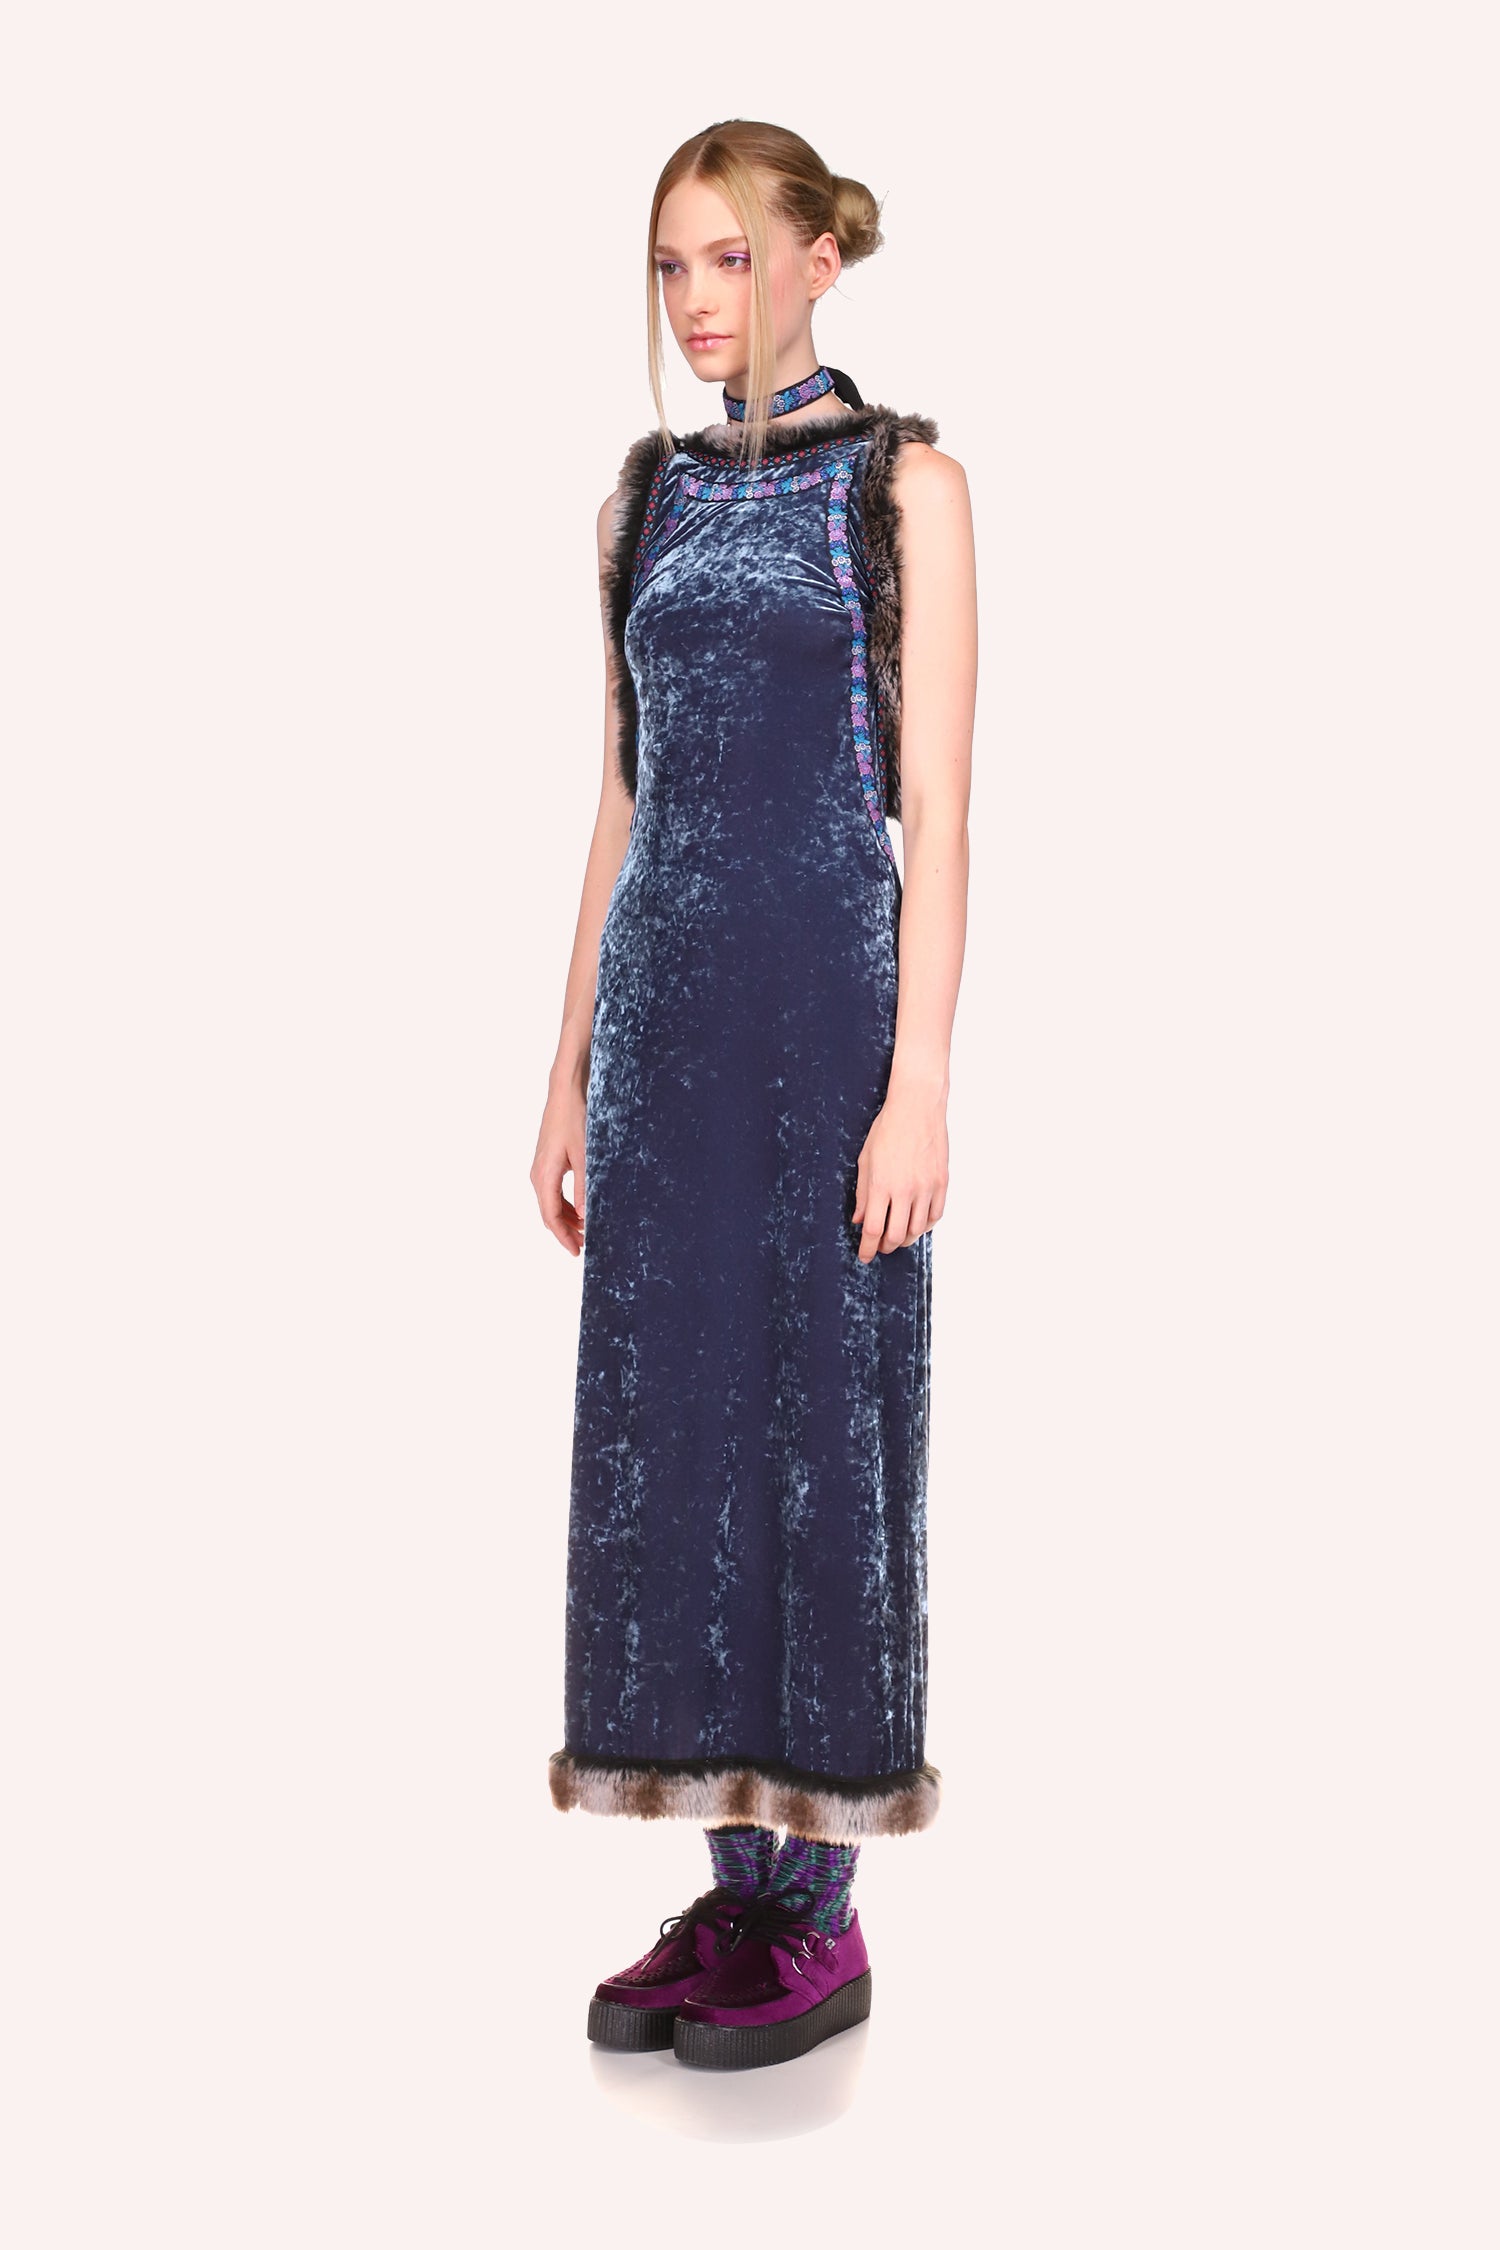 Princess Amber Dress Slate Blue, on each side a large cut from under arm to hips with plush faux fur along the seams